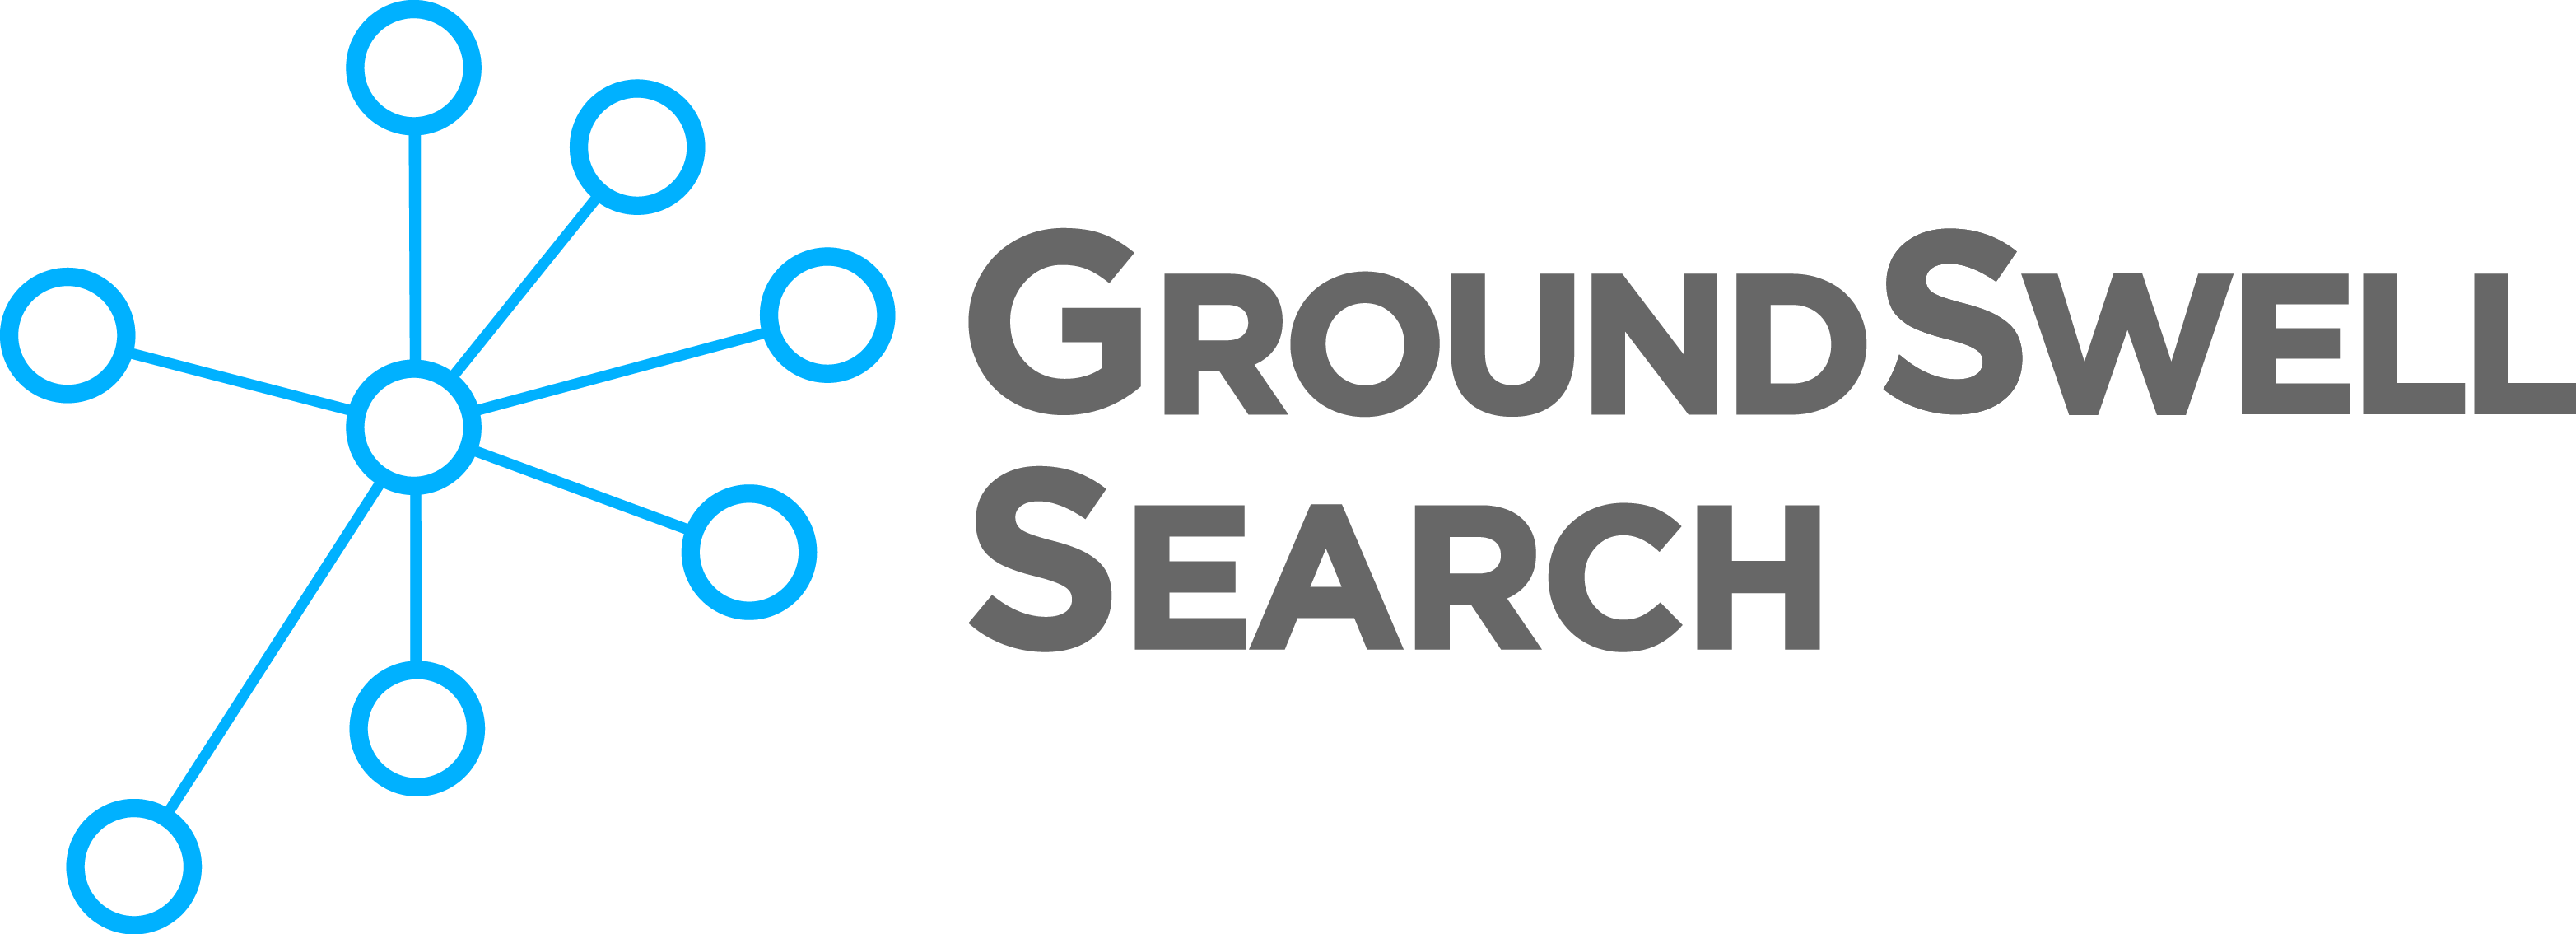 GroundSwell Search